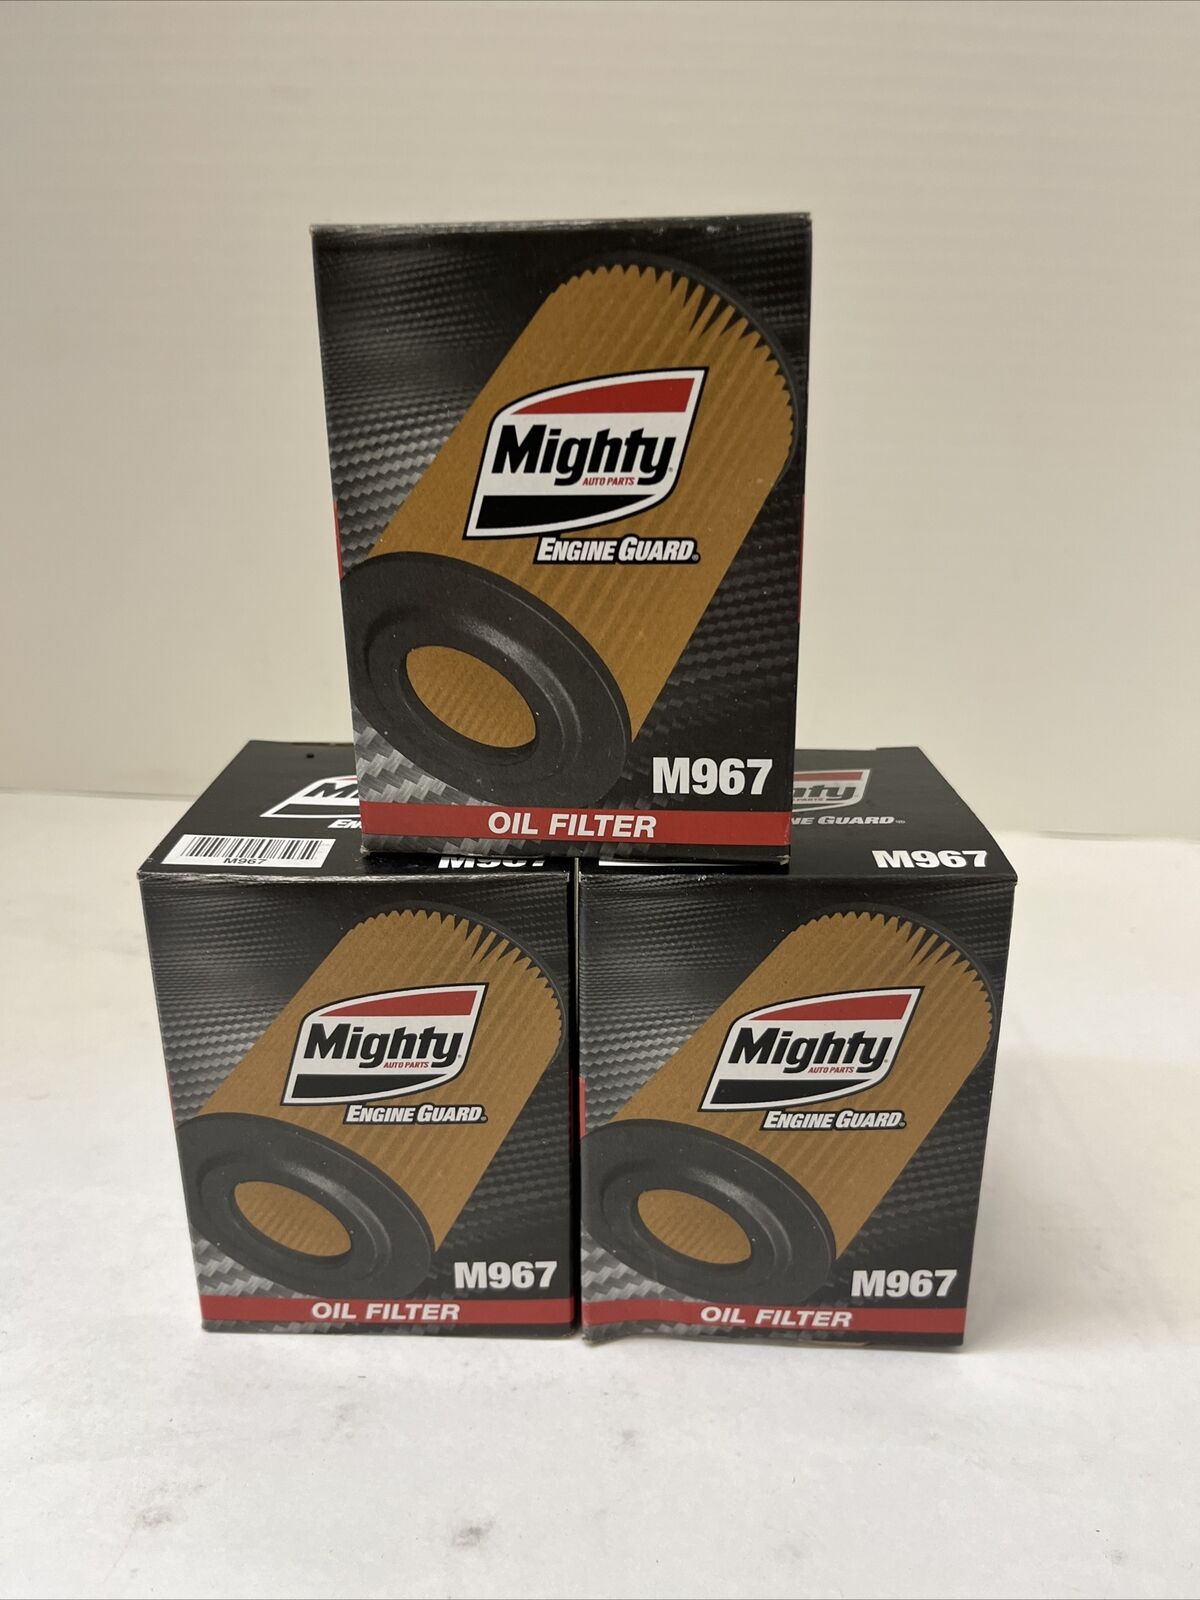 Engine Oil Filter mighty M967 Lot Of 3